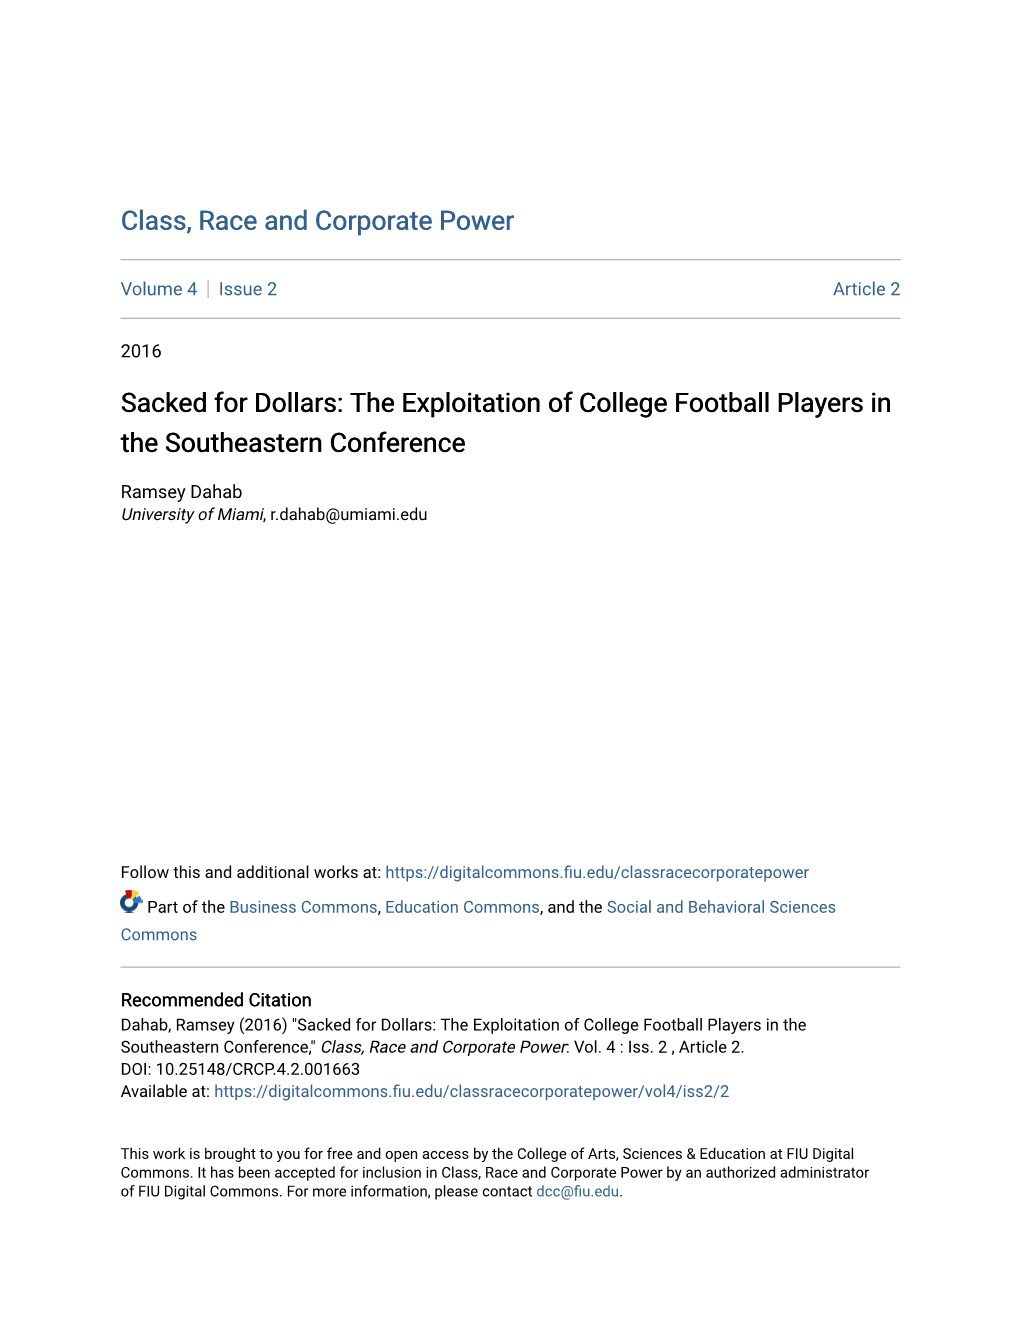 The Exploitation of College Football Players in the Southeastern Conference